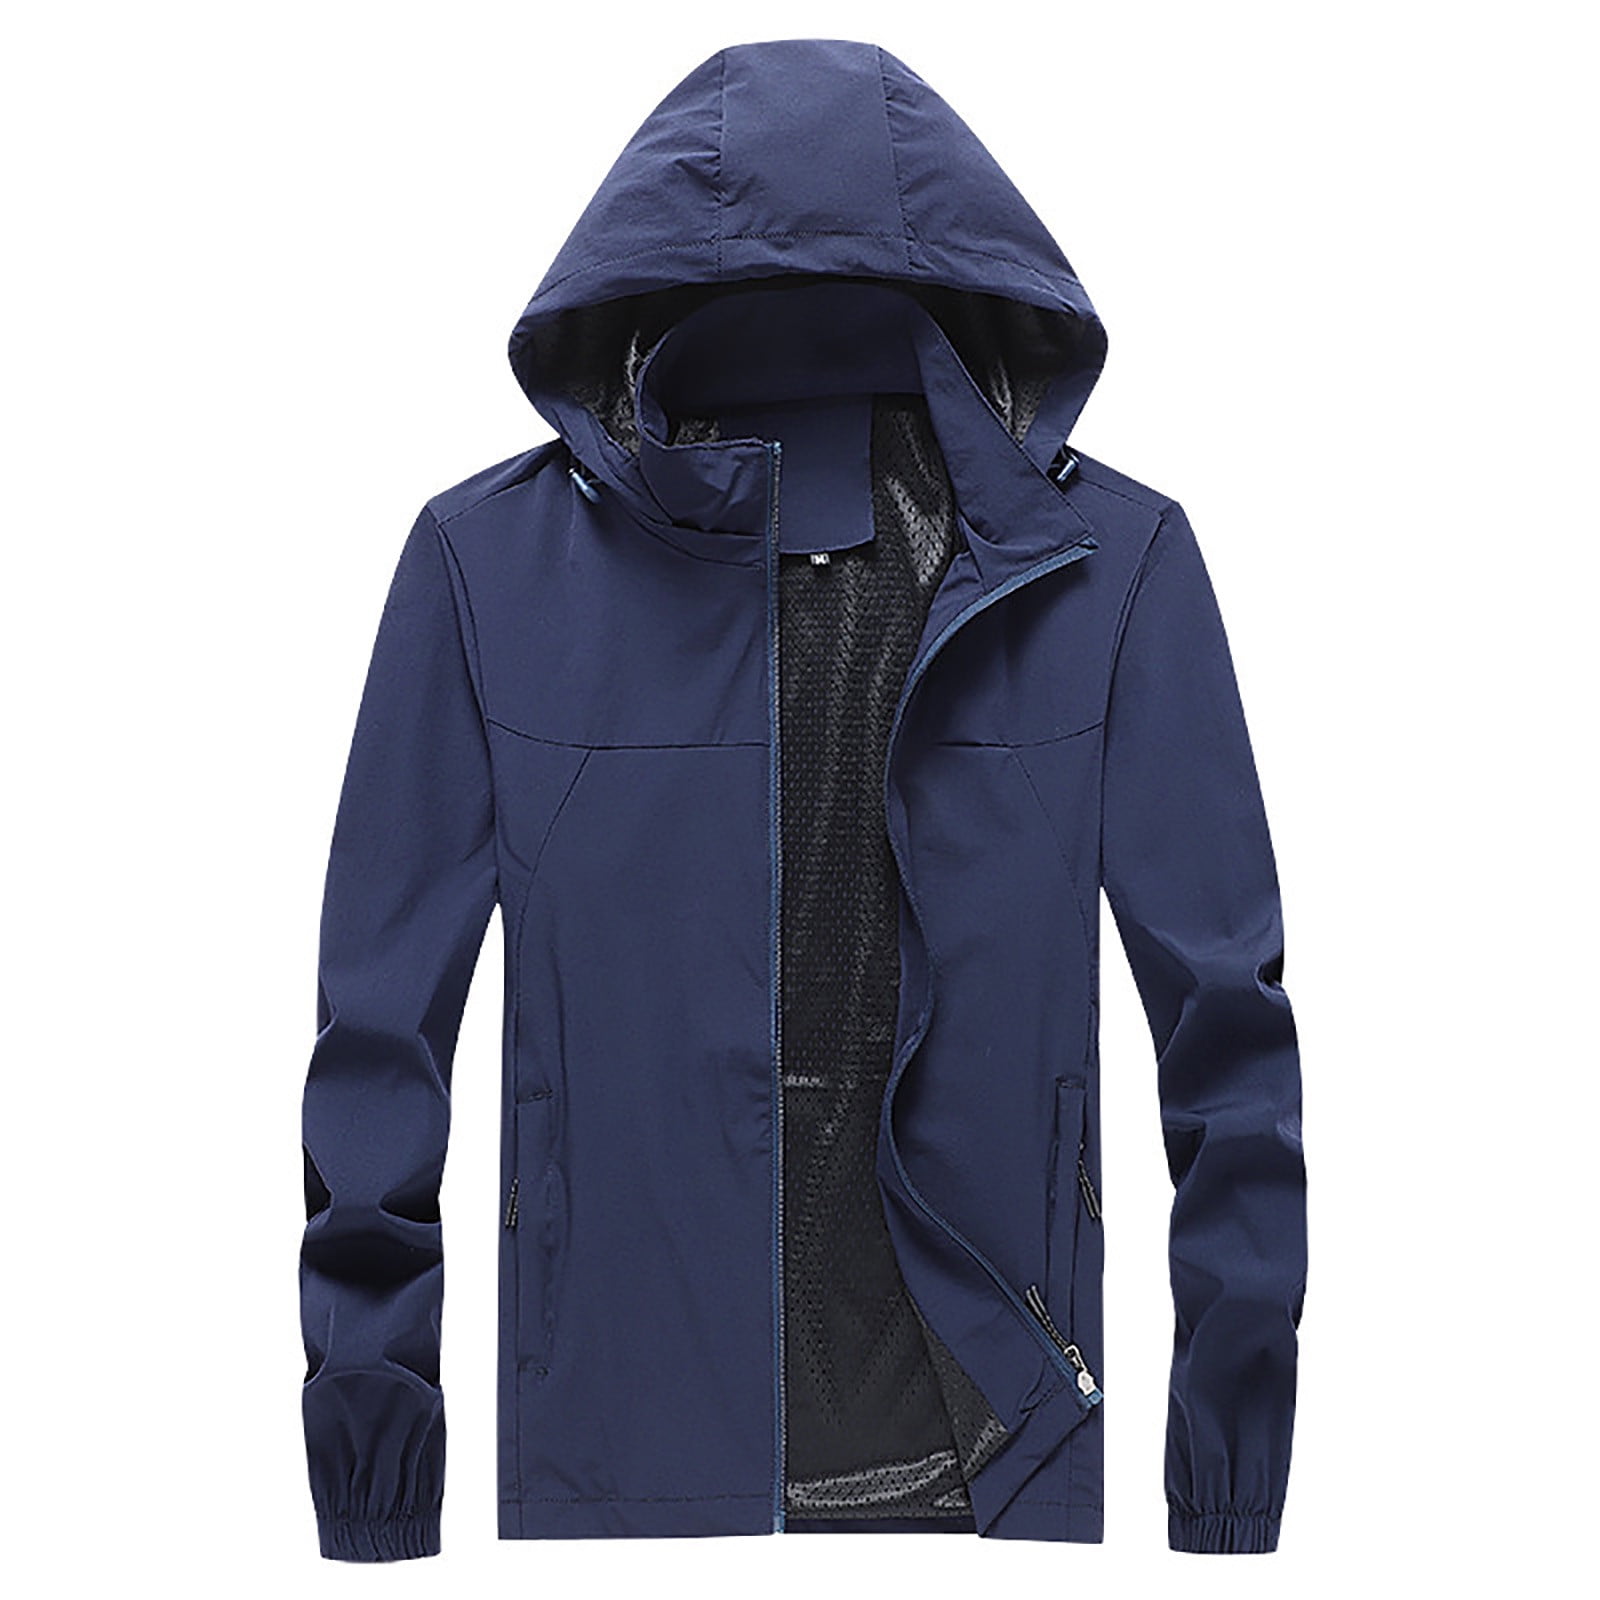 2021 Fashion Hooded Coat for Men's Waterproof Coat Long Sleeve Zipper Solid Color Loose Plus Size Outdoor Jacket Trench 